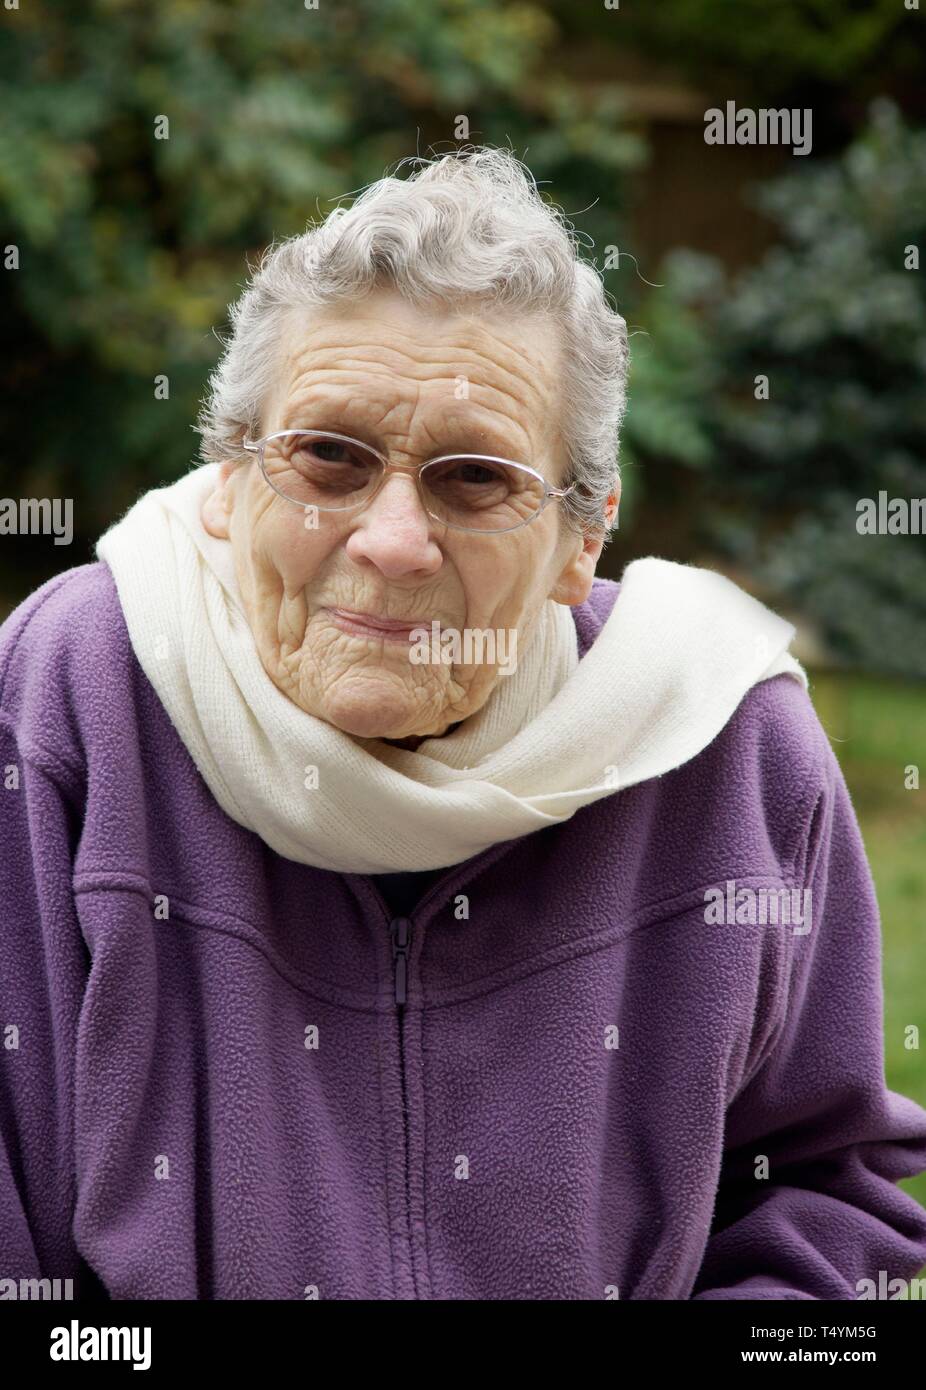 Elderly woman feeling very cold due to freezing temperatures Stock Photo